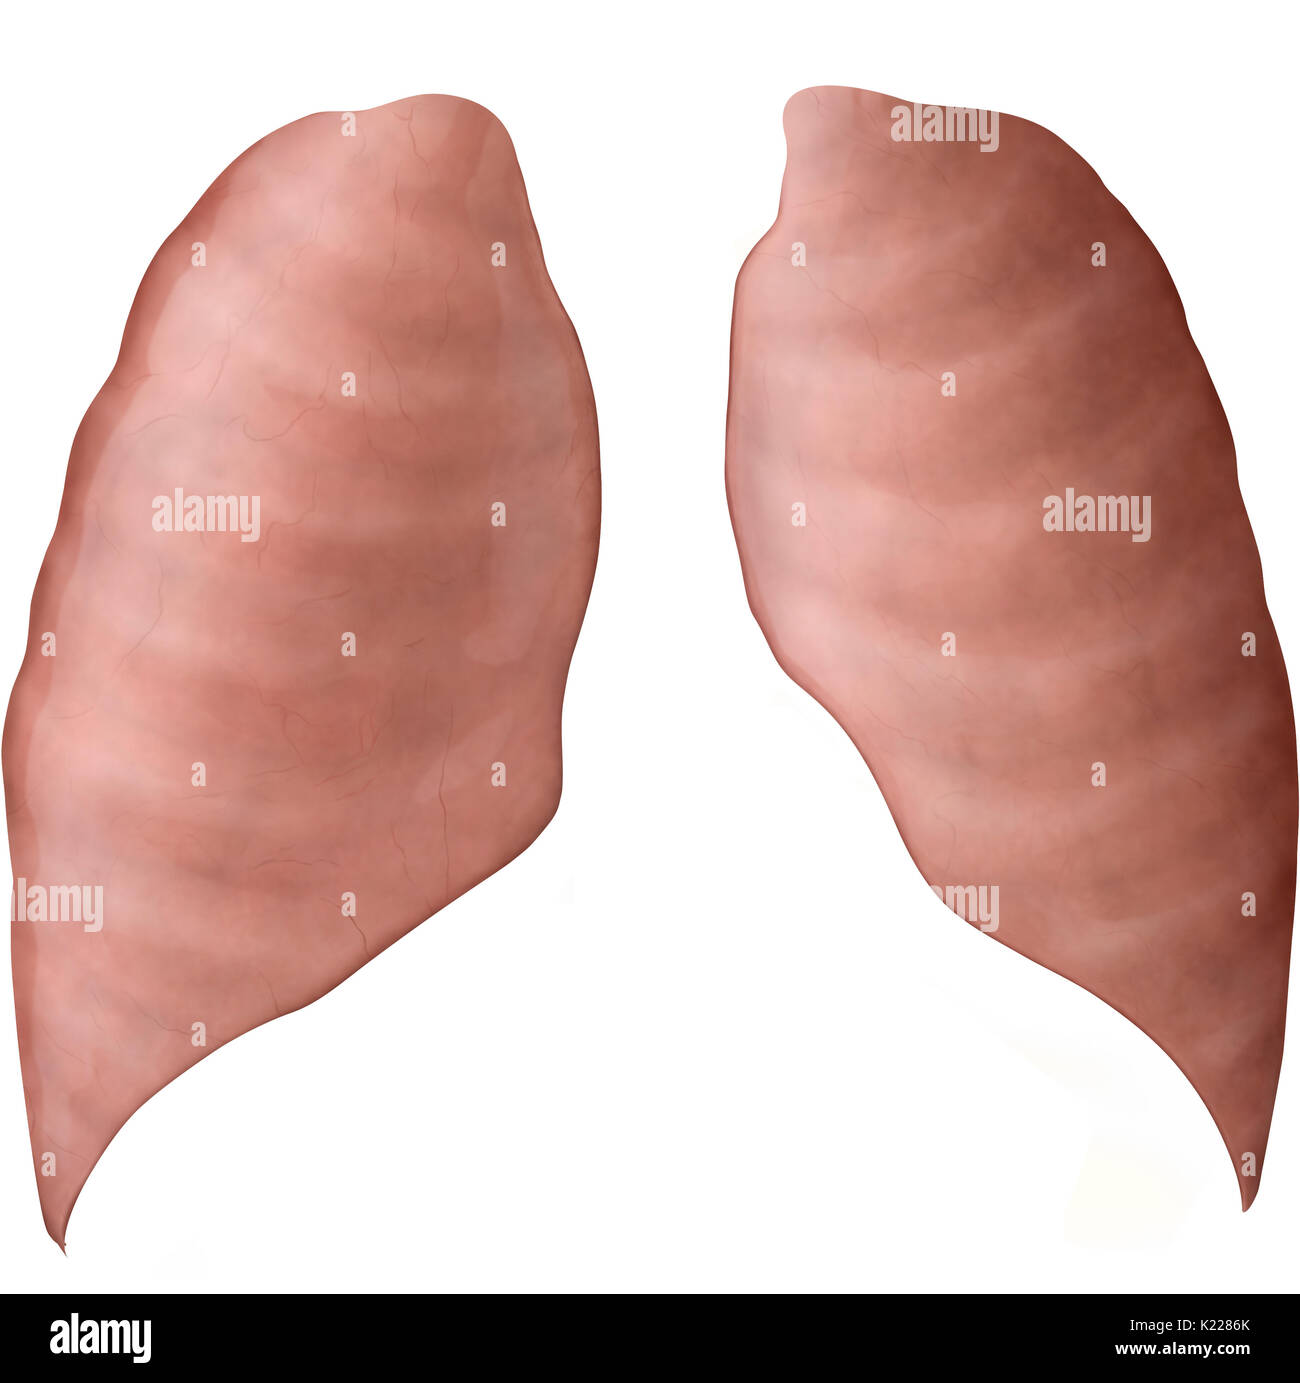 Respiratory organs formed of extensible tissue, in which air from the nasal and oral cavities is carried, ensuring oxygenation of the blood. Stock Photo